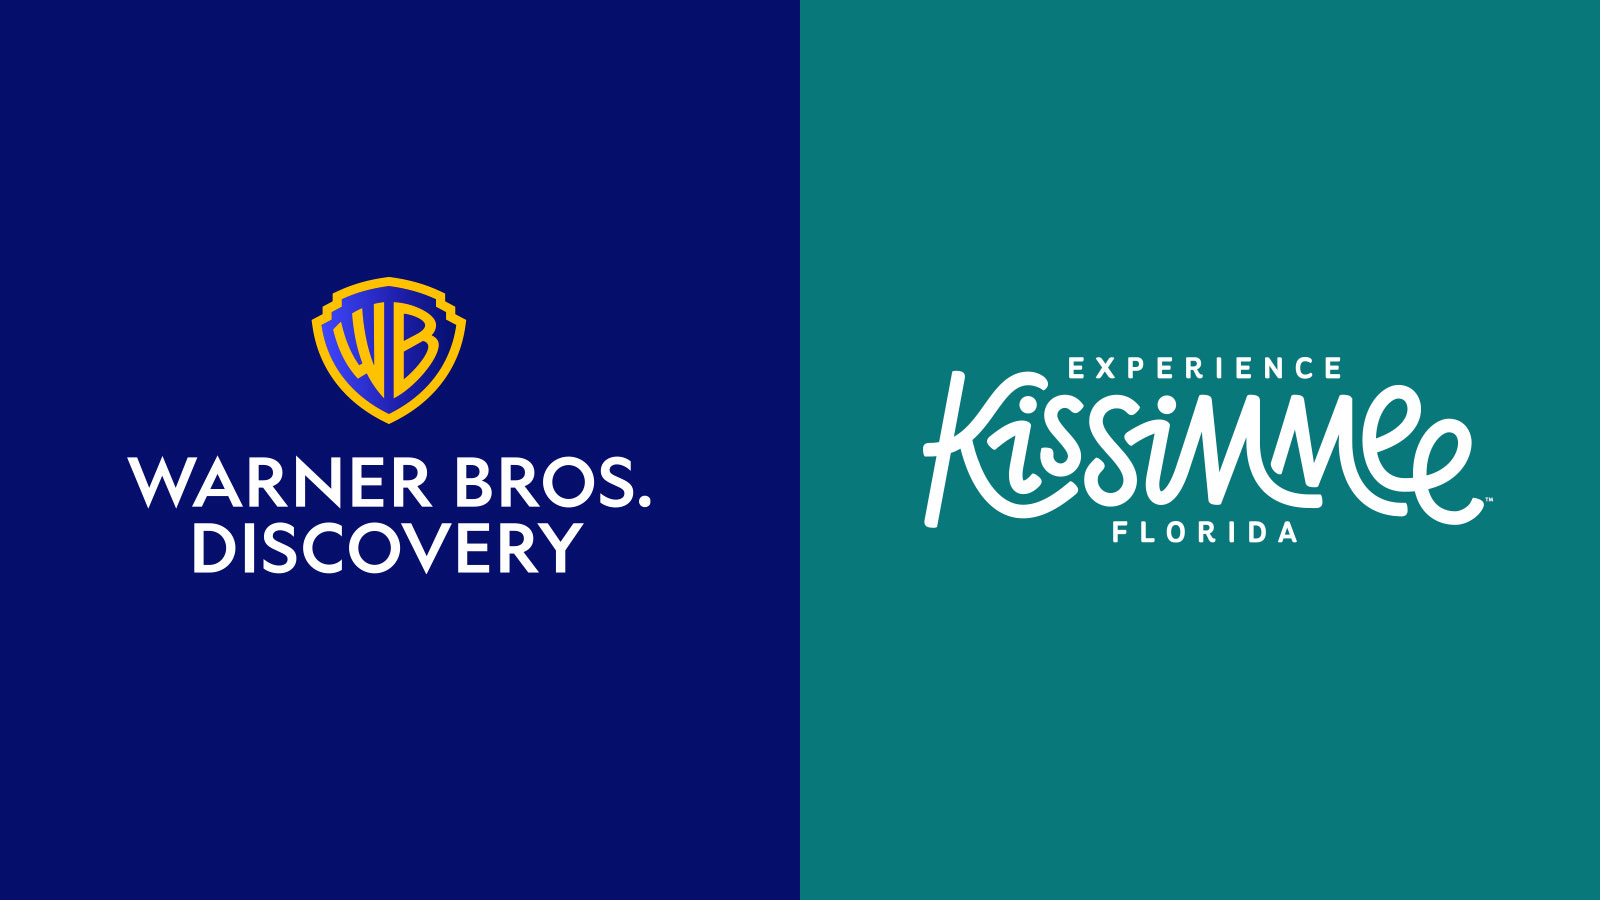 Warner Bros. Discovery Combines U.S. & International Creative Capabilities  and Audience Reach for New Campaign with Tourism Authority Experience  Kissimmee